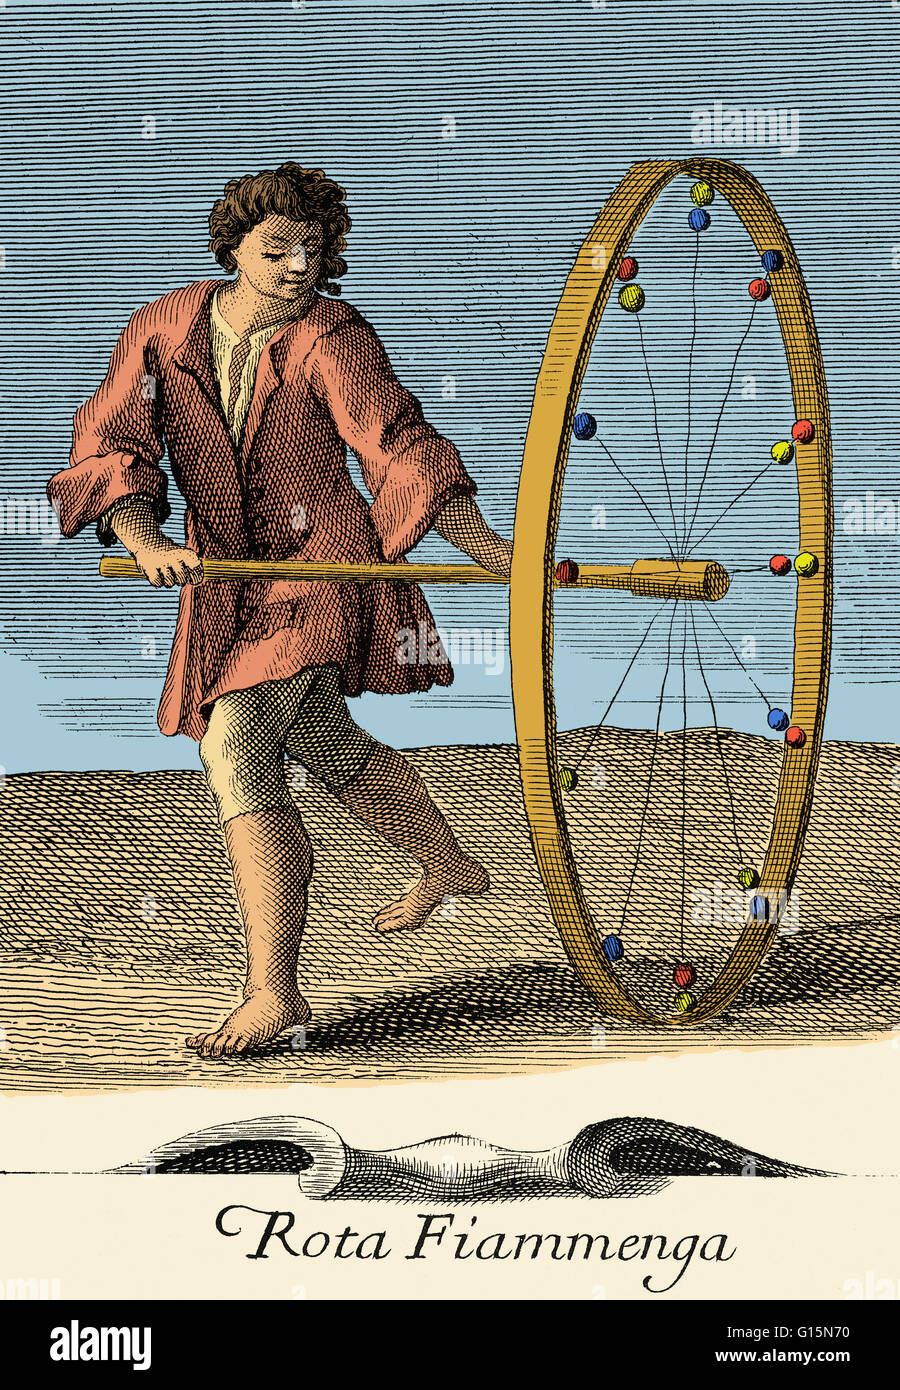 Toy wheel used by children in Flanders, 1723. Hoop rolling is both a sport and a child's game in which a large hoop is rolled along the ground, generally by means of an implement wielded by the player. The aim of the game is to keep the hoop upright for l Stock Photo